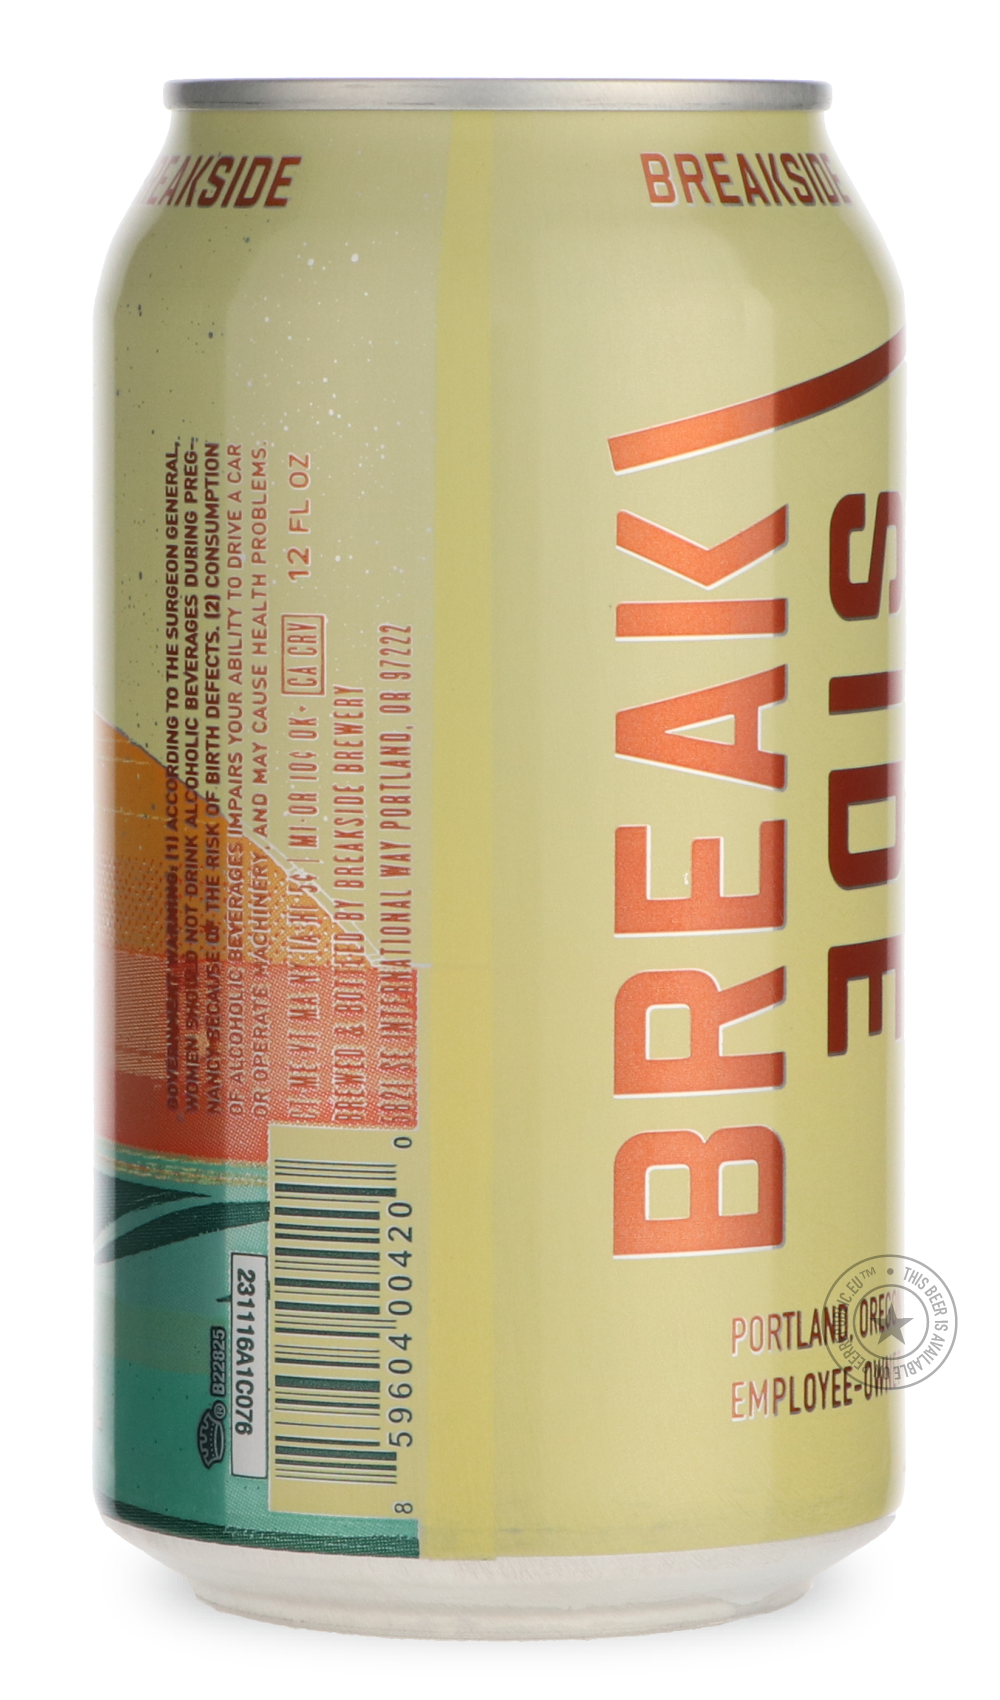 -Breakside- Stay West-IPA- Only @ Beer Republic - The best online beer store for American & Canadian craft beer - Buy beer online from the USA and Canada - Bier online kopen - Amerikaans bier kopen - Craft beer store - Craft beer kopen - Amerikanisch bier kaufen - Bier online kaufen - Acheter biere online - IPA - Stout - Porter - New England IPA - Hazy IPA - Imperial Stout - Barrel Aged - Barrel Aged Imperial Stout - Brown - Dark beer - Blond - Blonde - Pilsner - Lager - Wheat - Weizen - Amber - Barley Wine